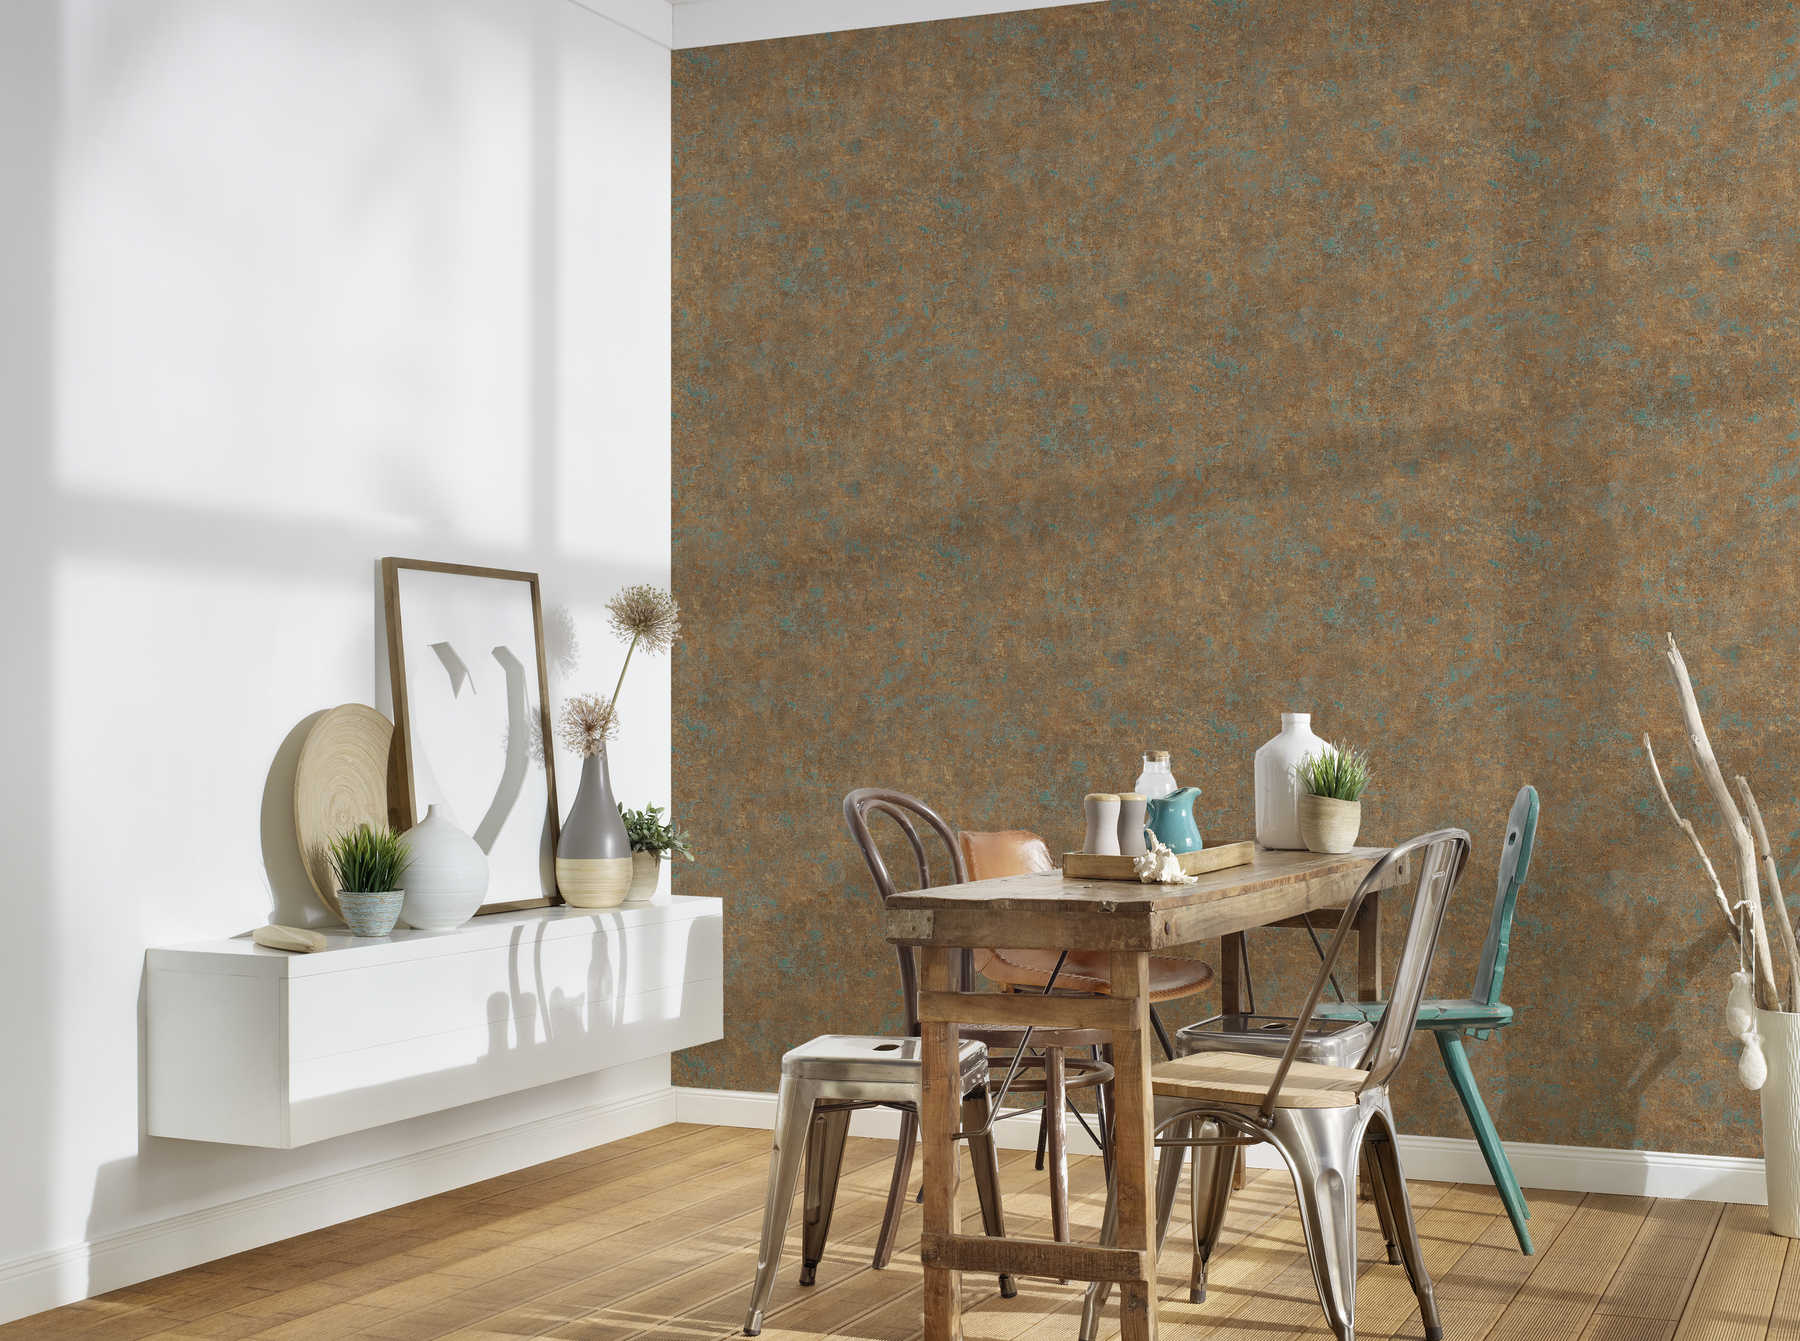             Plain wallpaper with colour pattern in used look - bronze, petrol, brown
        